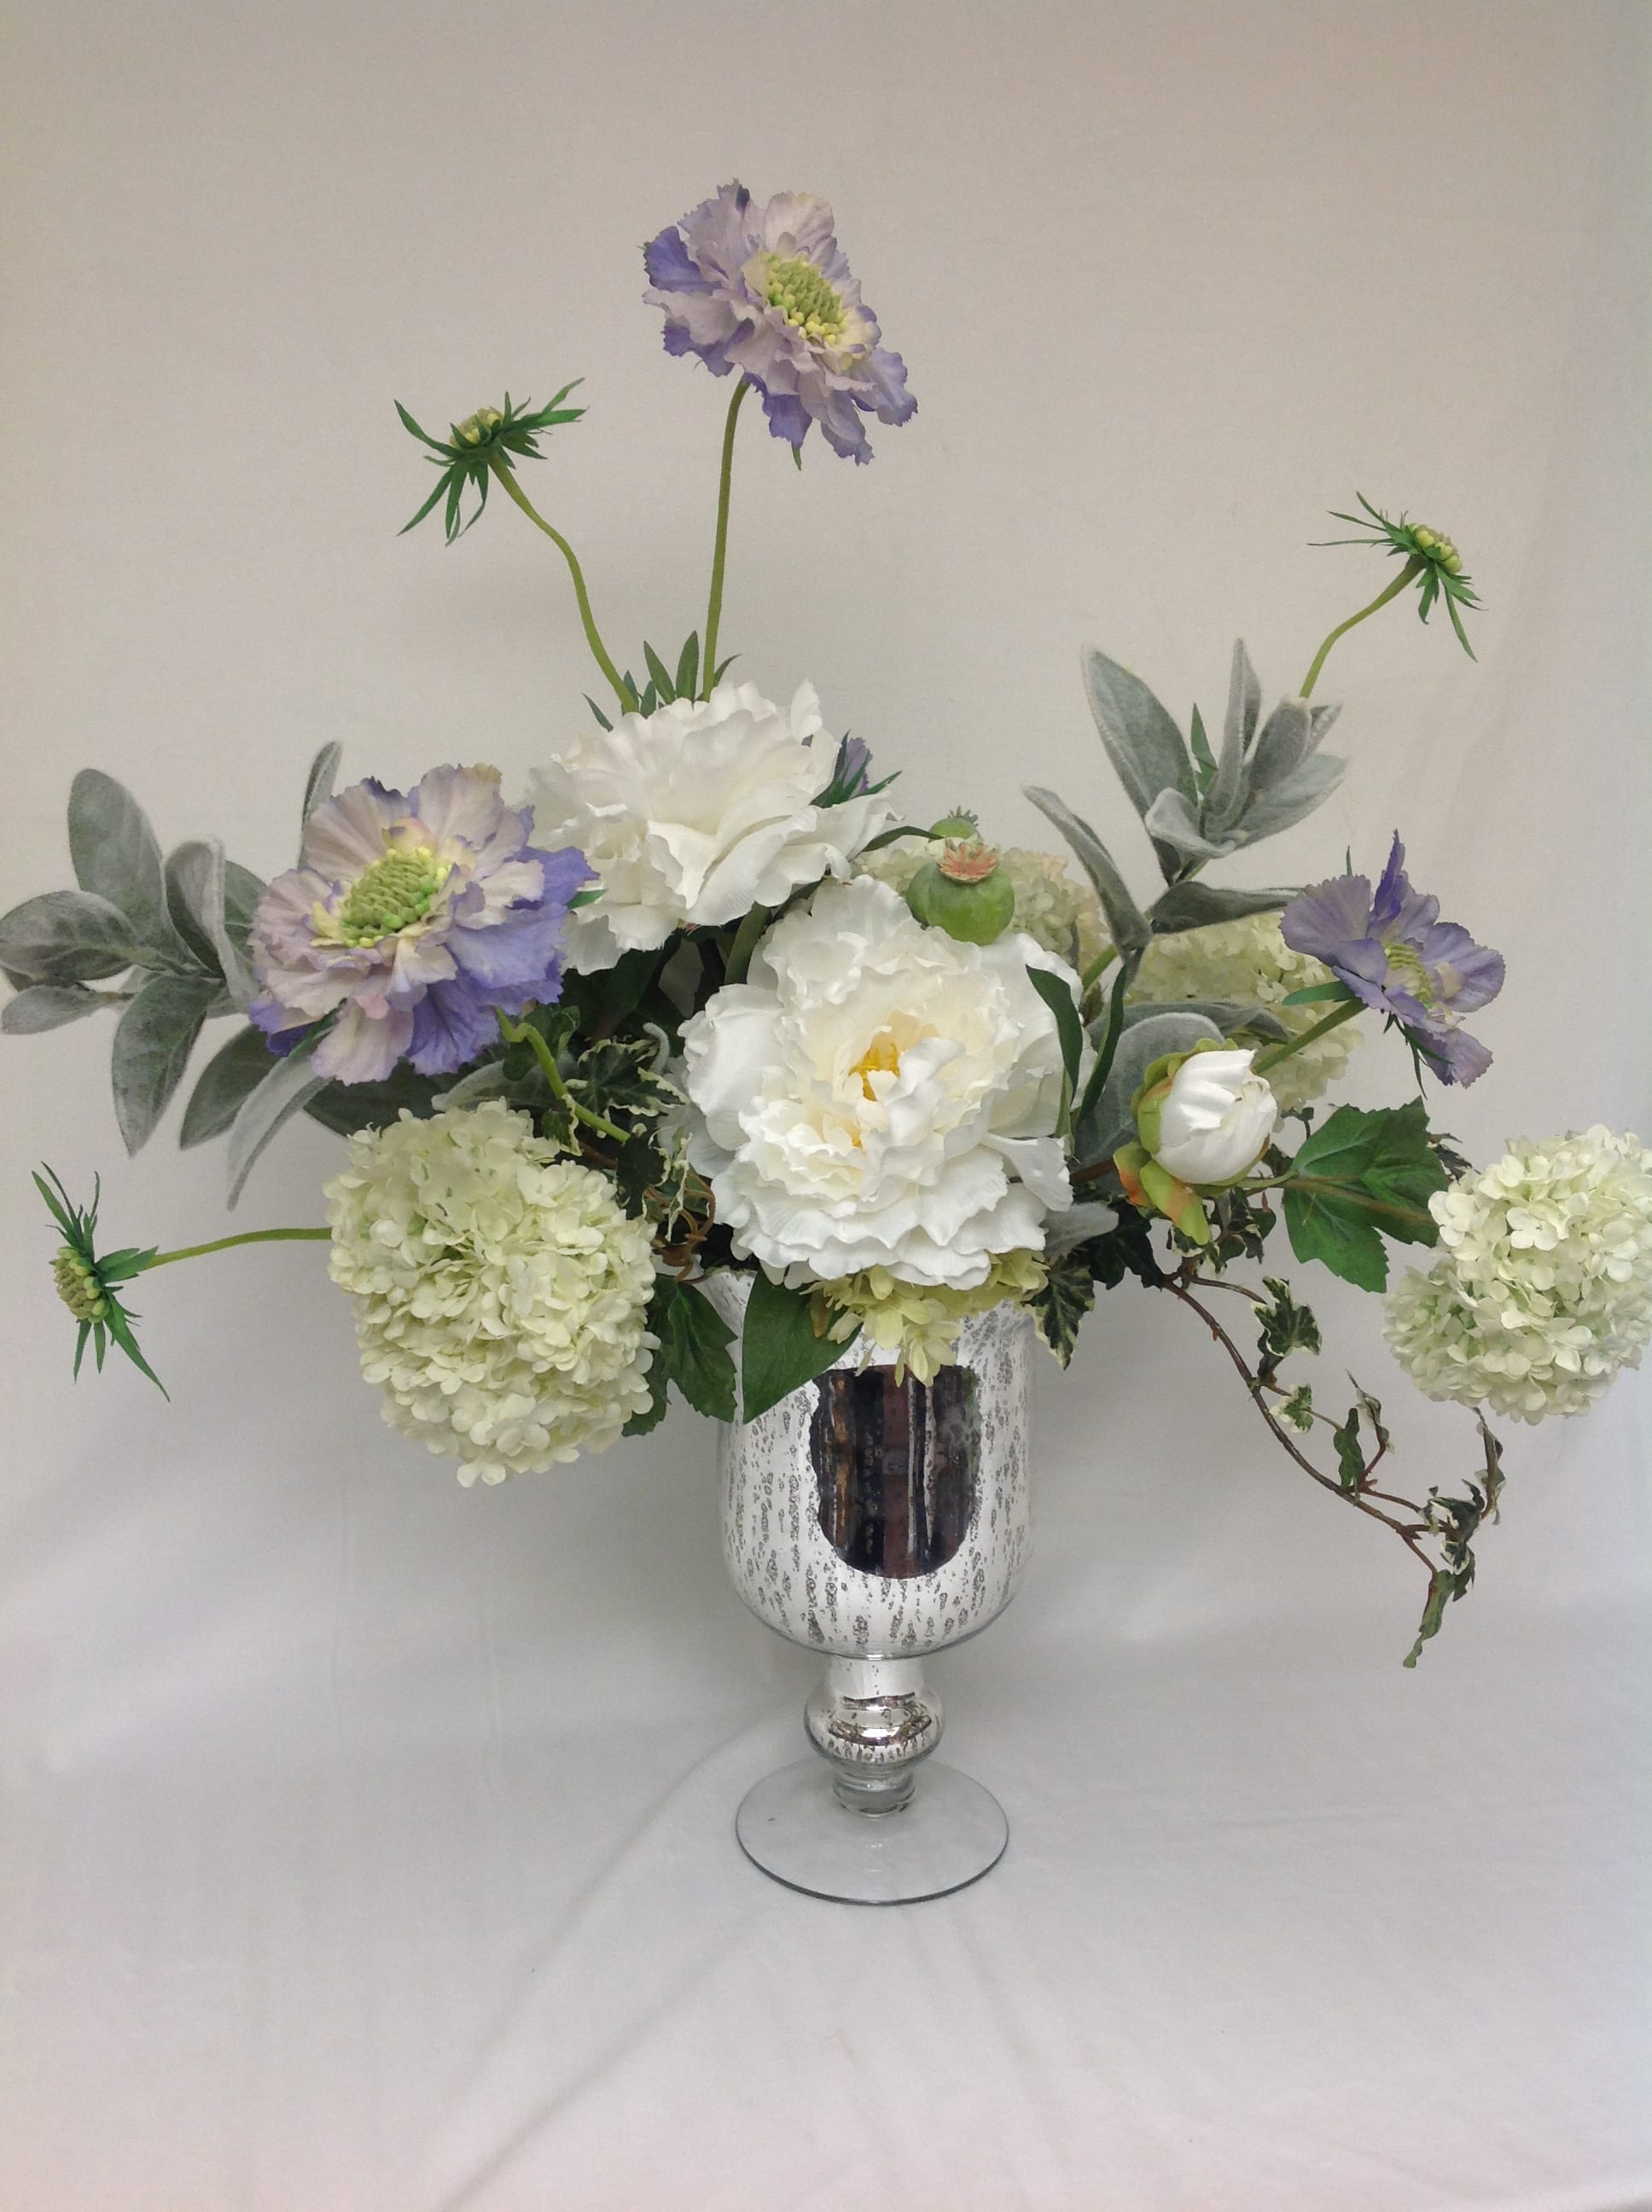 Sweet Lavender - Almost neutral with the perfect lavender accent colors Beauty everlasting with faux botanicals